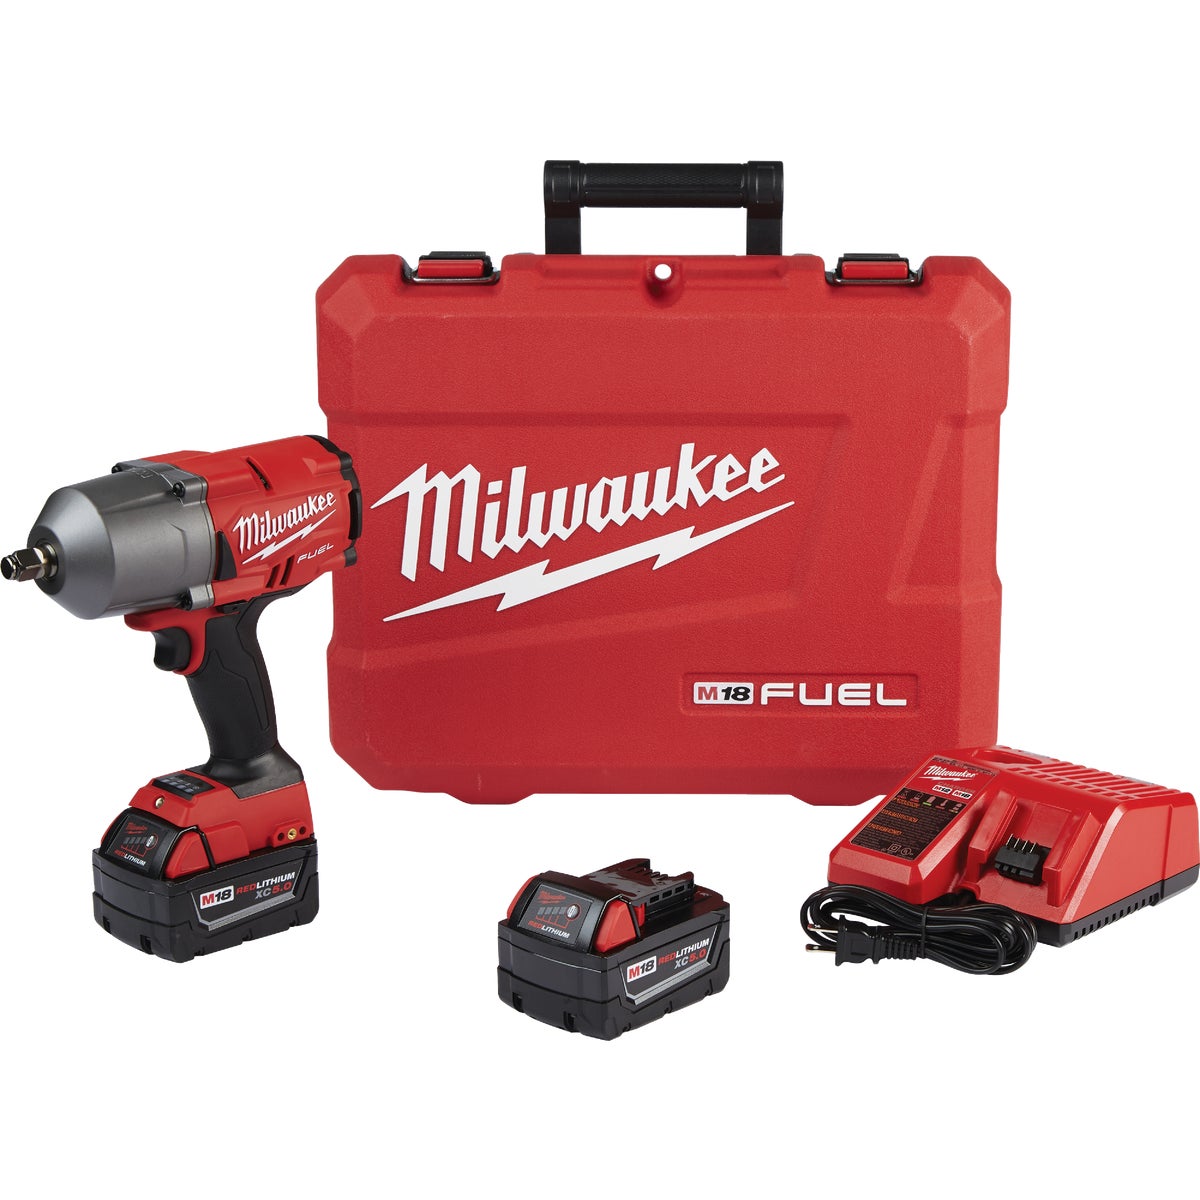 Milwaukee M18 FUEL Brushless 1/2 In. High Torque Cordless Impact Wrench with Friction Ring Kit